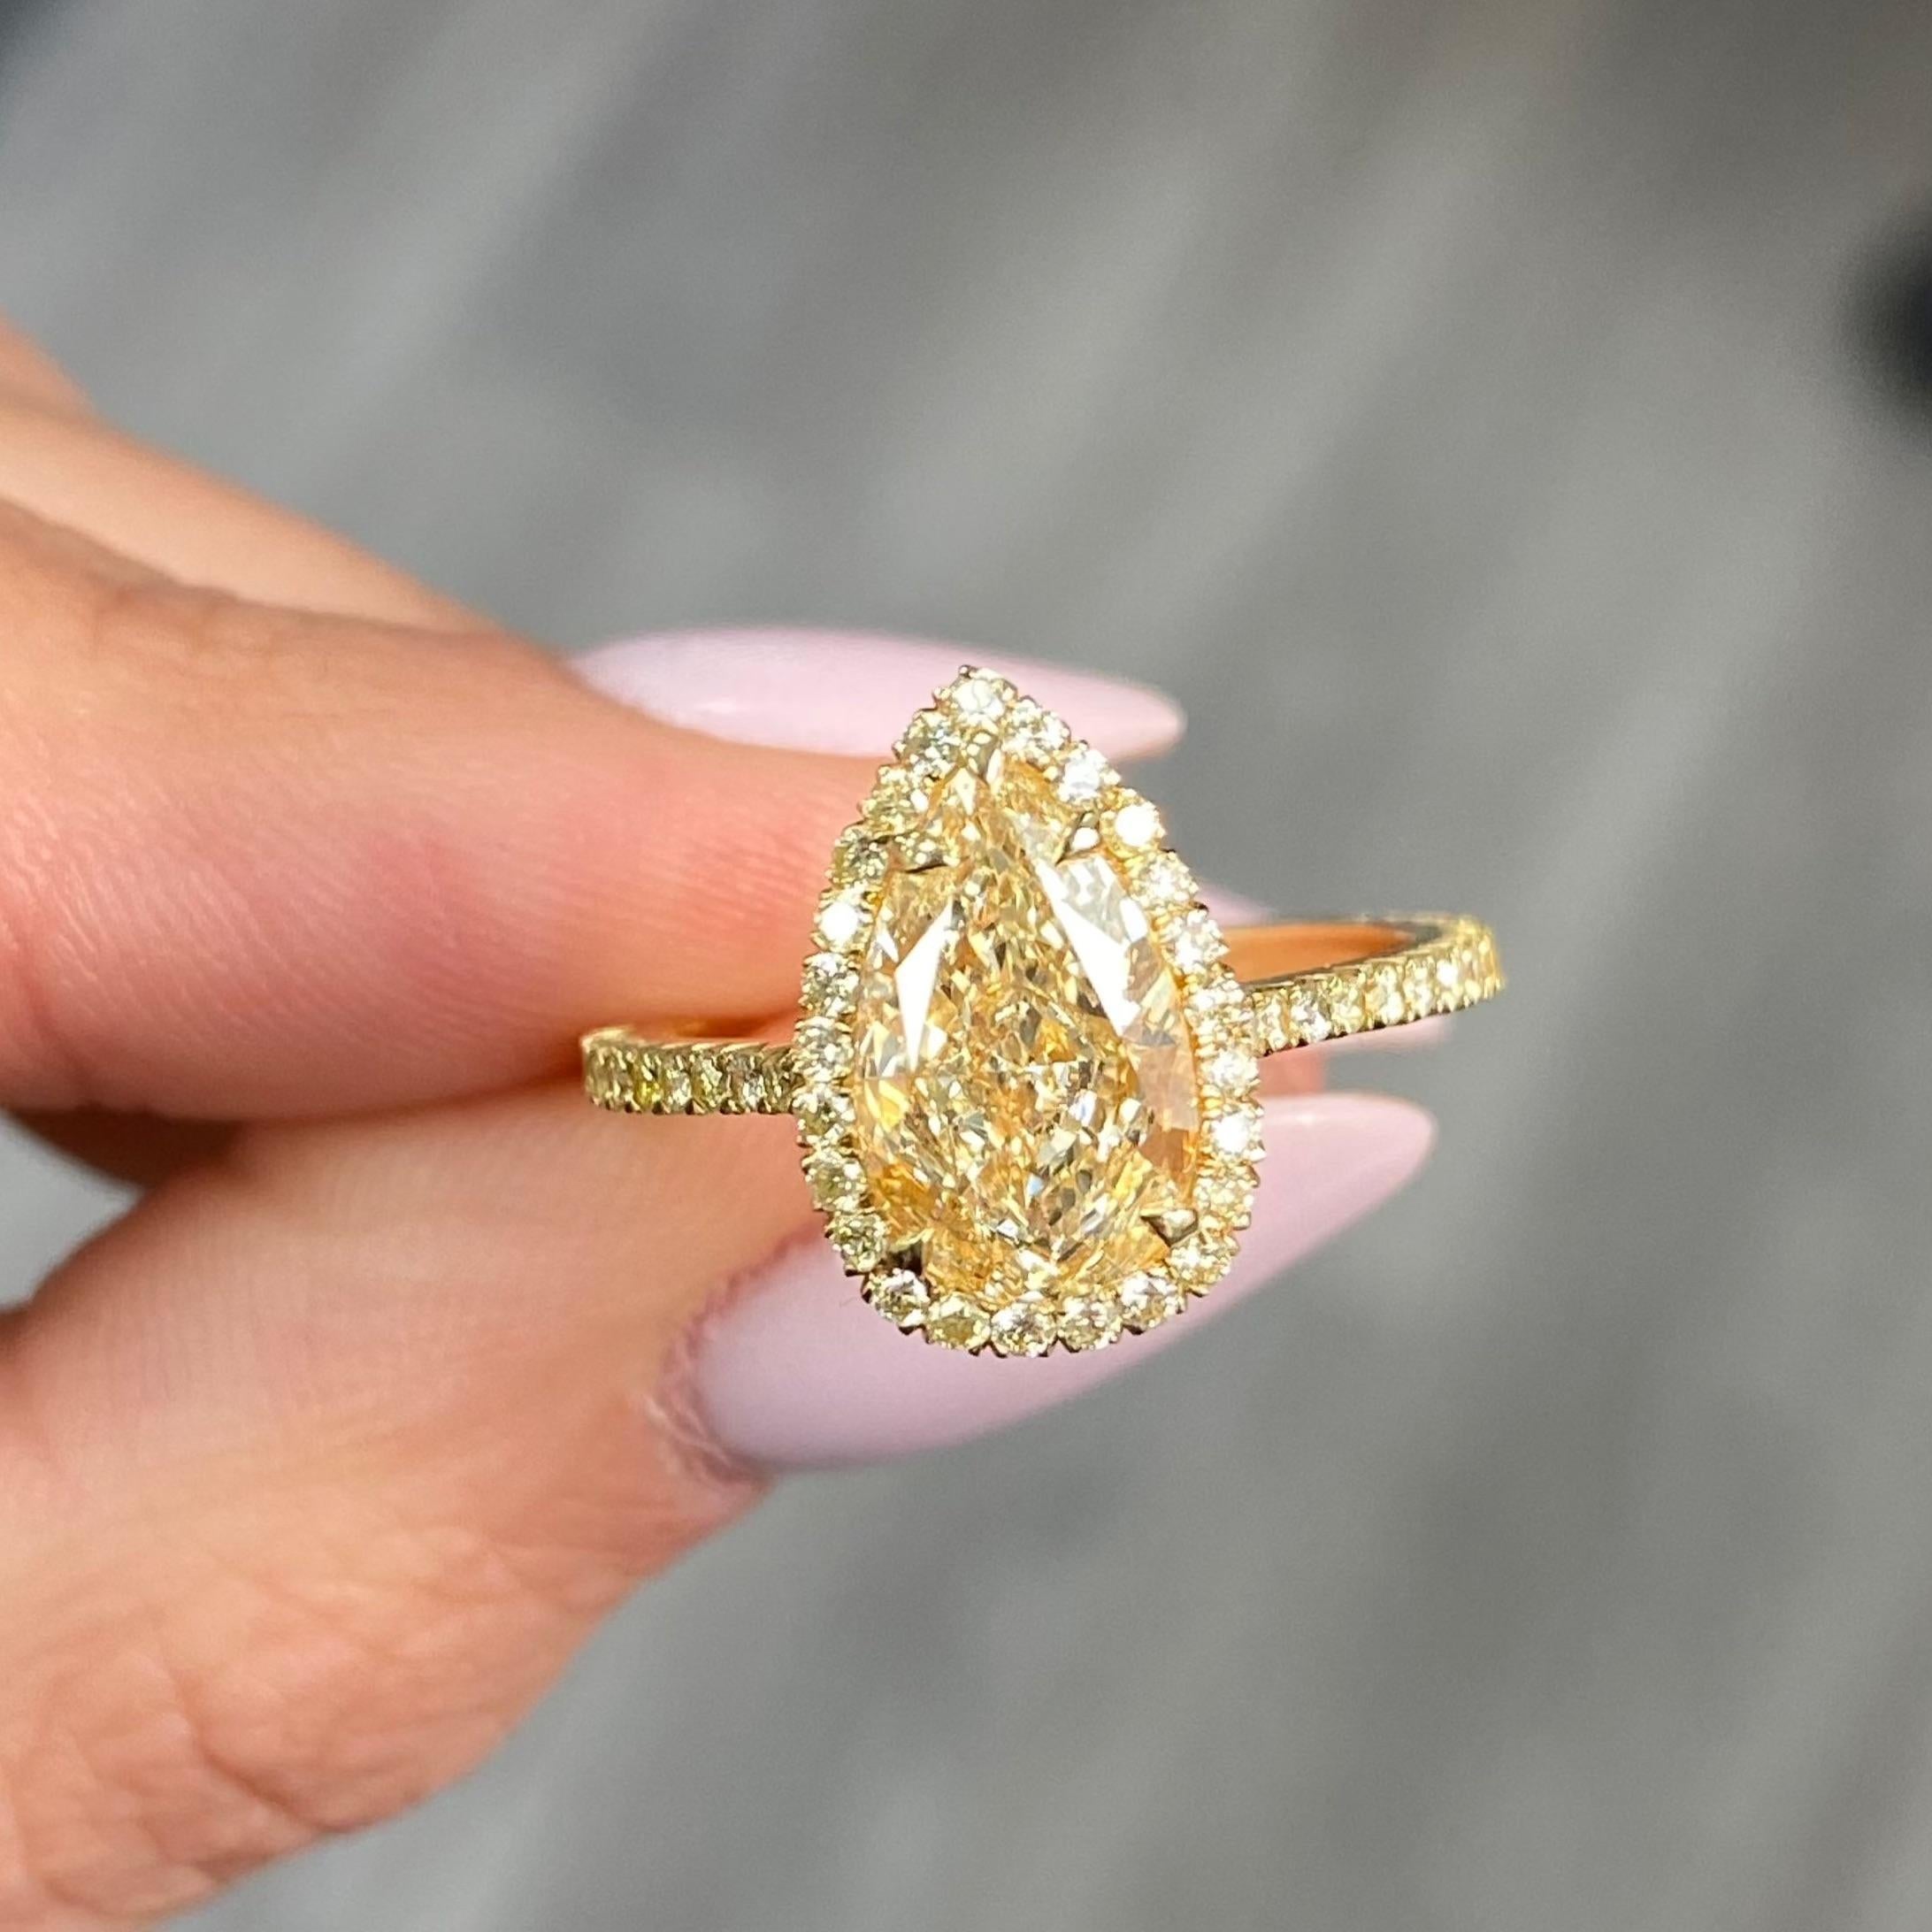 2.57 Carats Total
Yellow and White Pear Shape Diamonds
Hinge bangle
Halfway diamond pave
18k White Gold
Handmade in NYC 

This piece can be viewed before purchase in our showroom in NYC, or at one of our retail partners throughout the country,